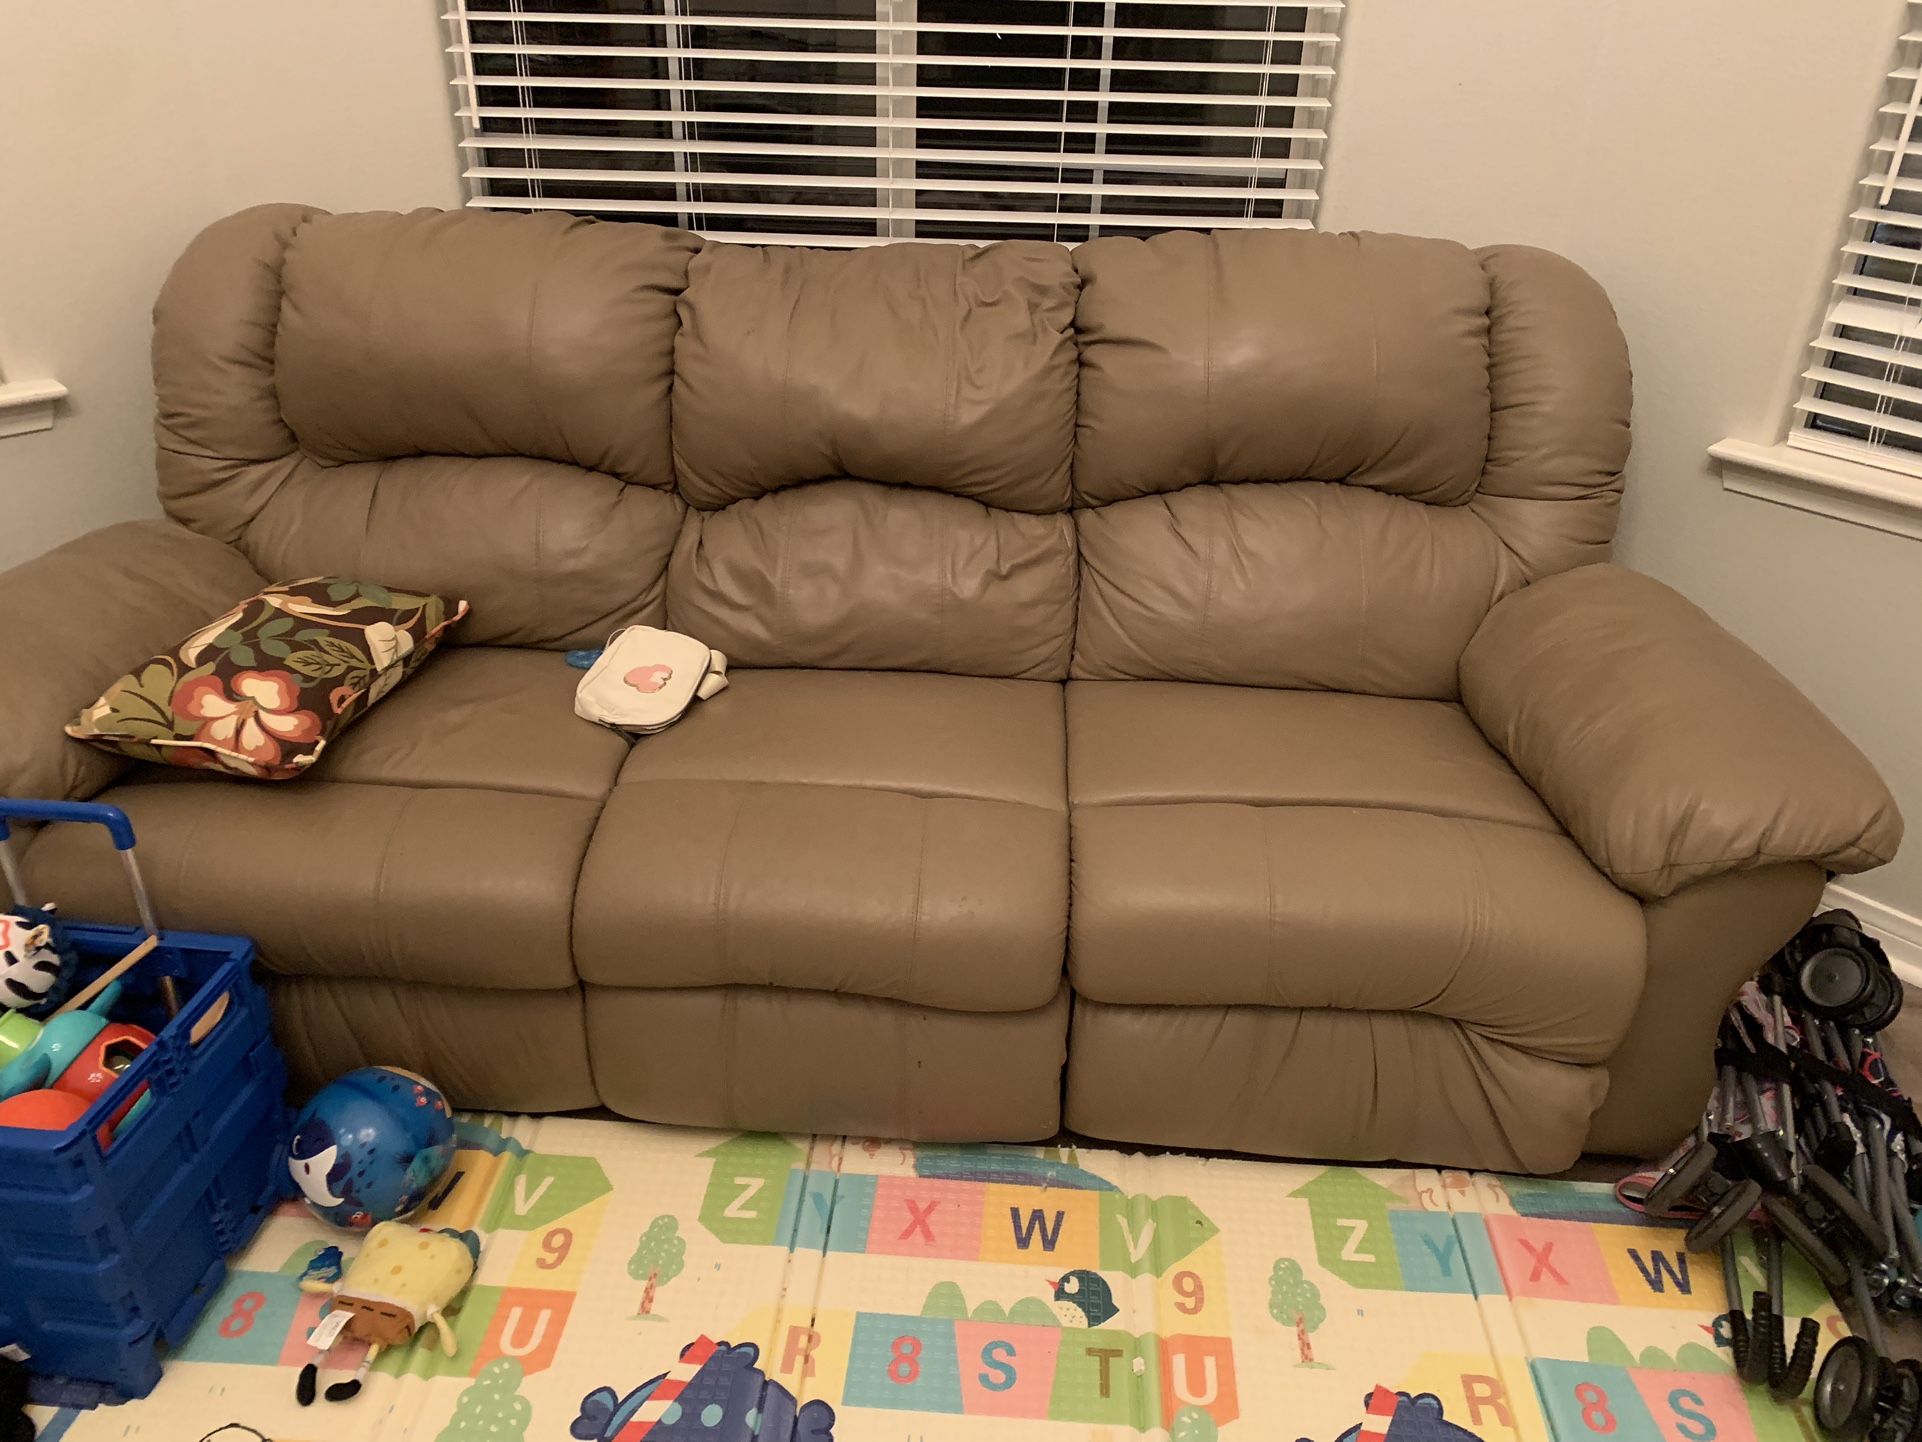 Leather Reclining Couch And Loveseat